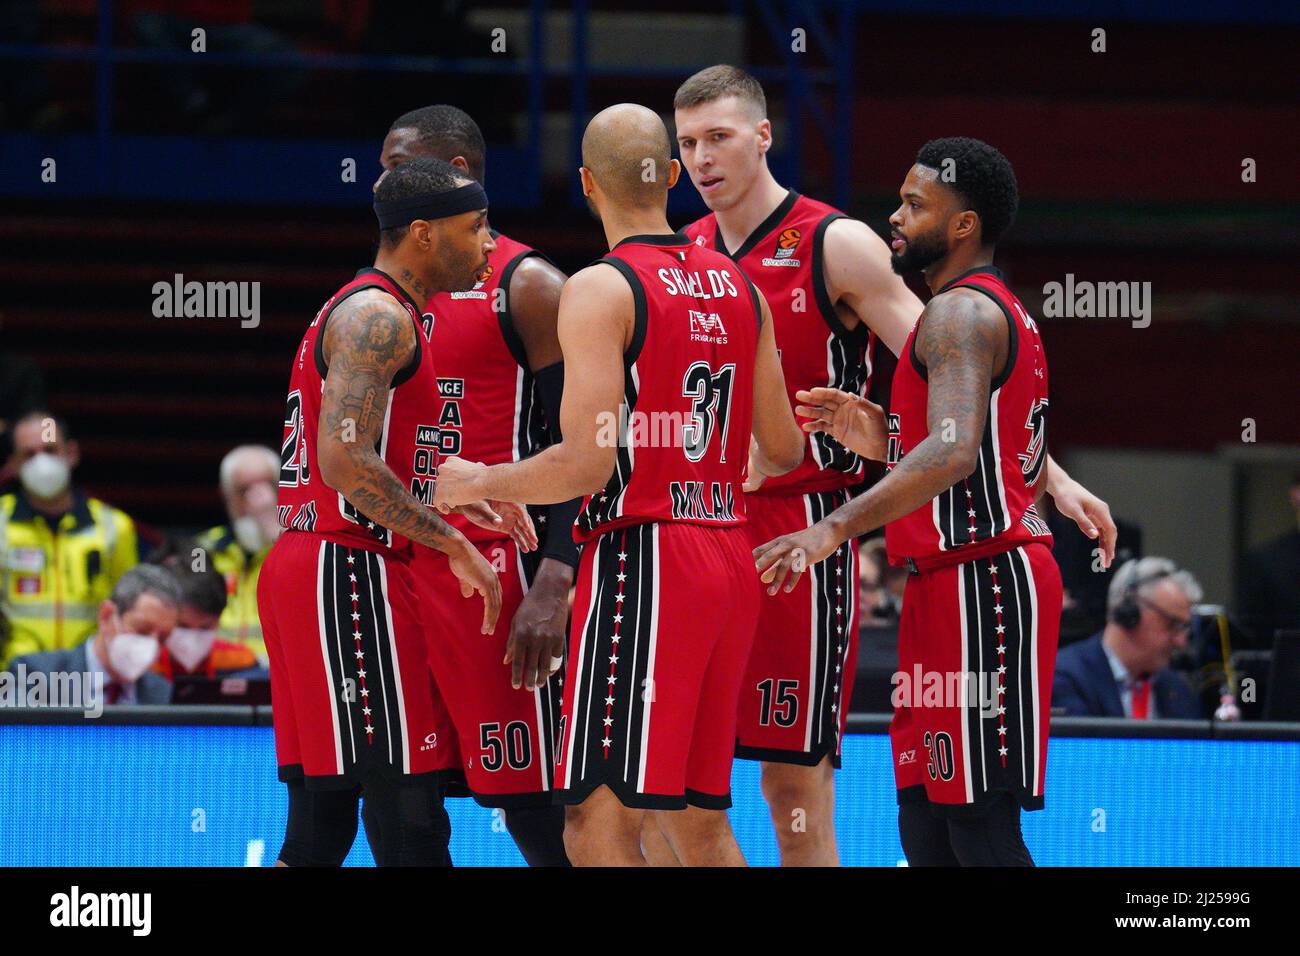 Milan, Italy. 29th Mar, 2022. AX Armani Exchange Olimpia Milano team during  AX Armani Exchange Milano vs Bayern Monaco, Basketball Euroleague  Championship in Milan, Italy, March 29 2022 Credit: Independent Photo  Agency/Alamy